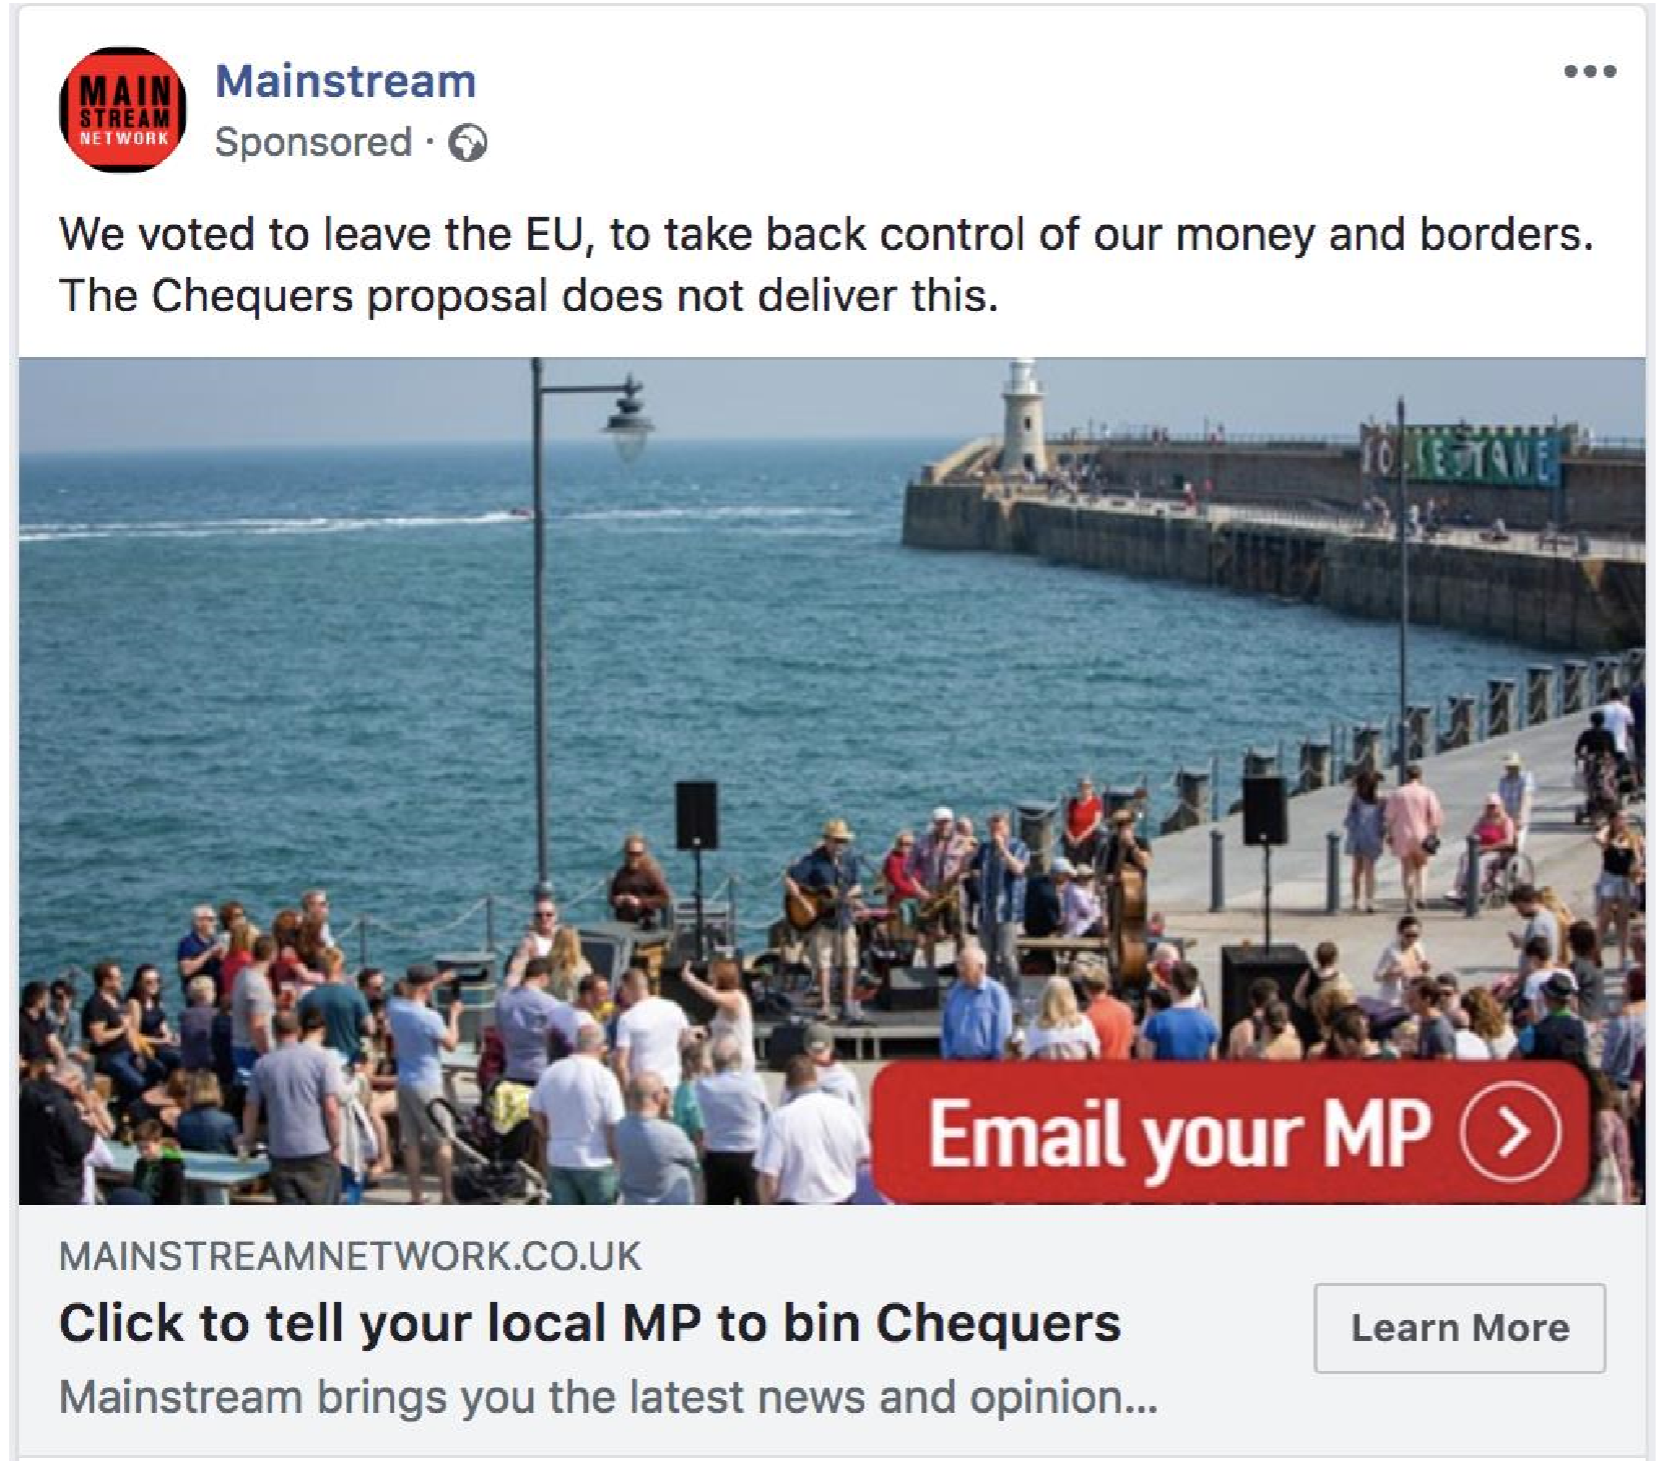 A screenshot of a Facebook advert from Mainstream showing the coast at Folkestone, dismissing the Chequers Brexit deal